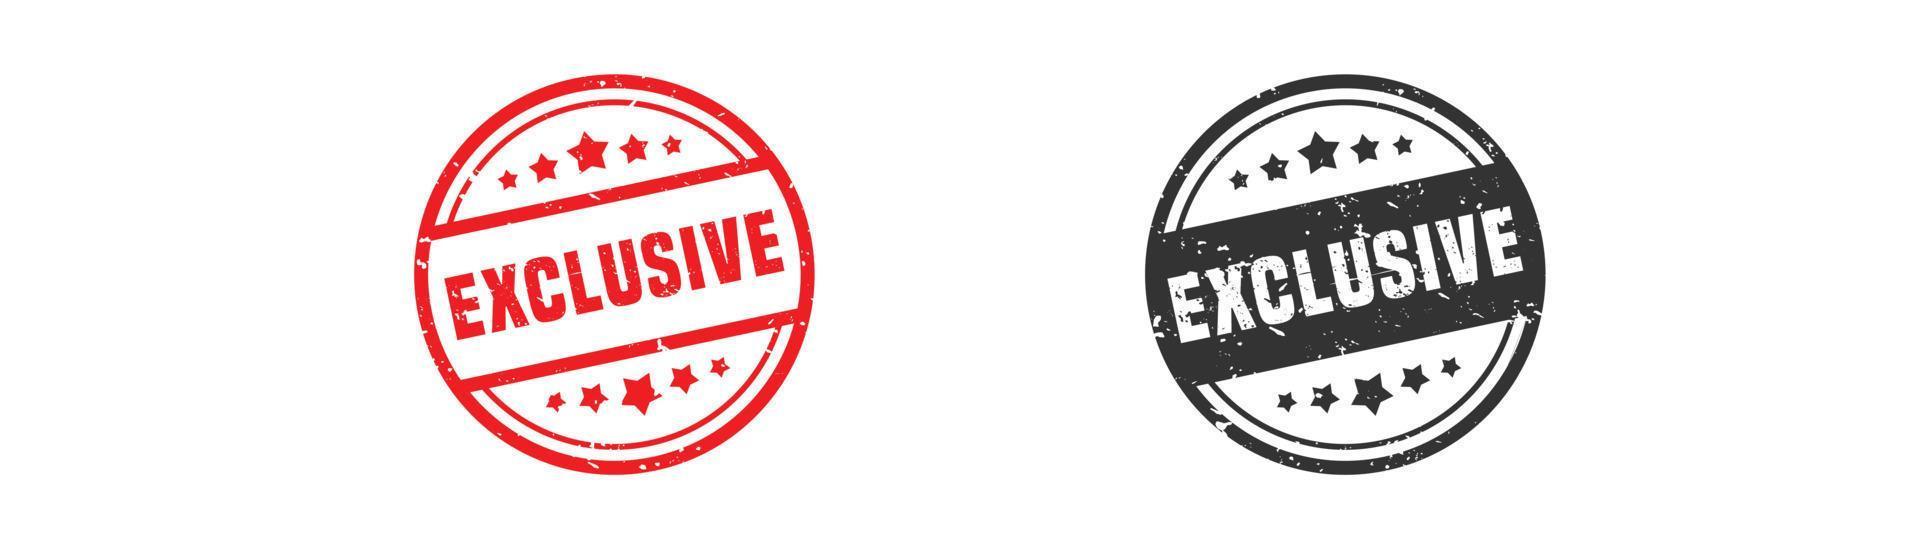 Exclusive stamp rubber with grunge style on white background. vector